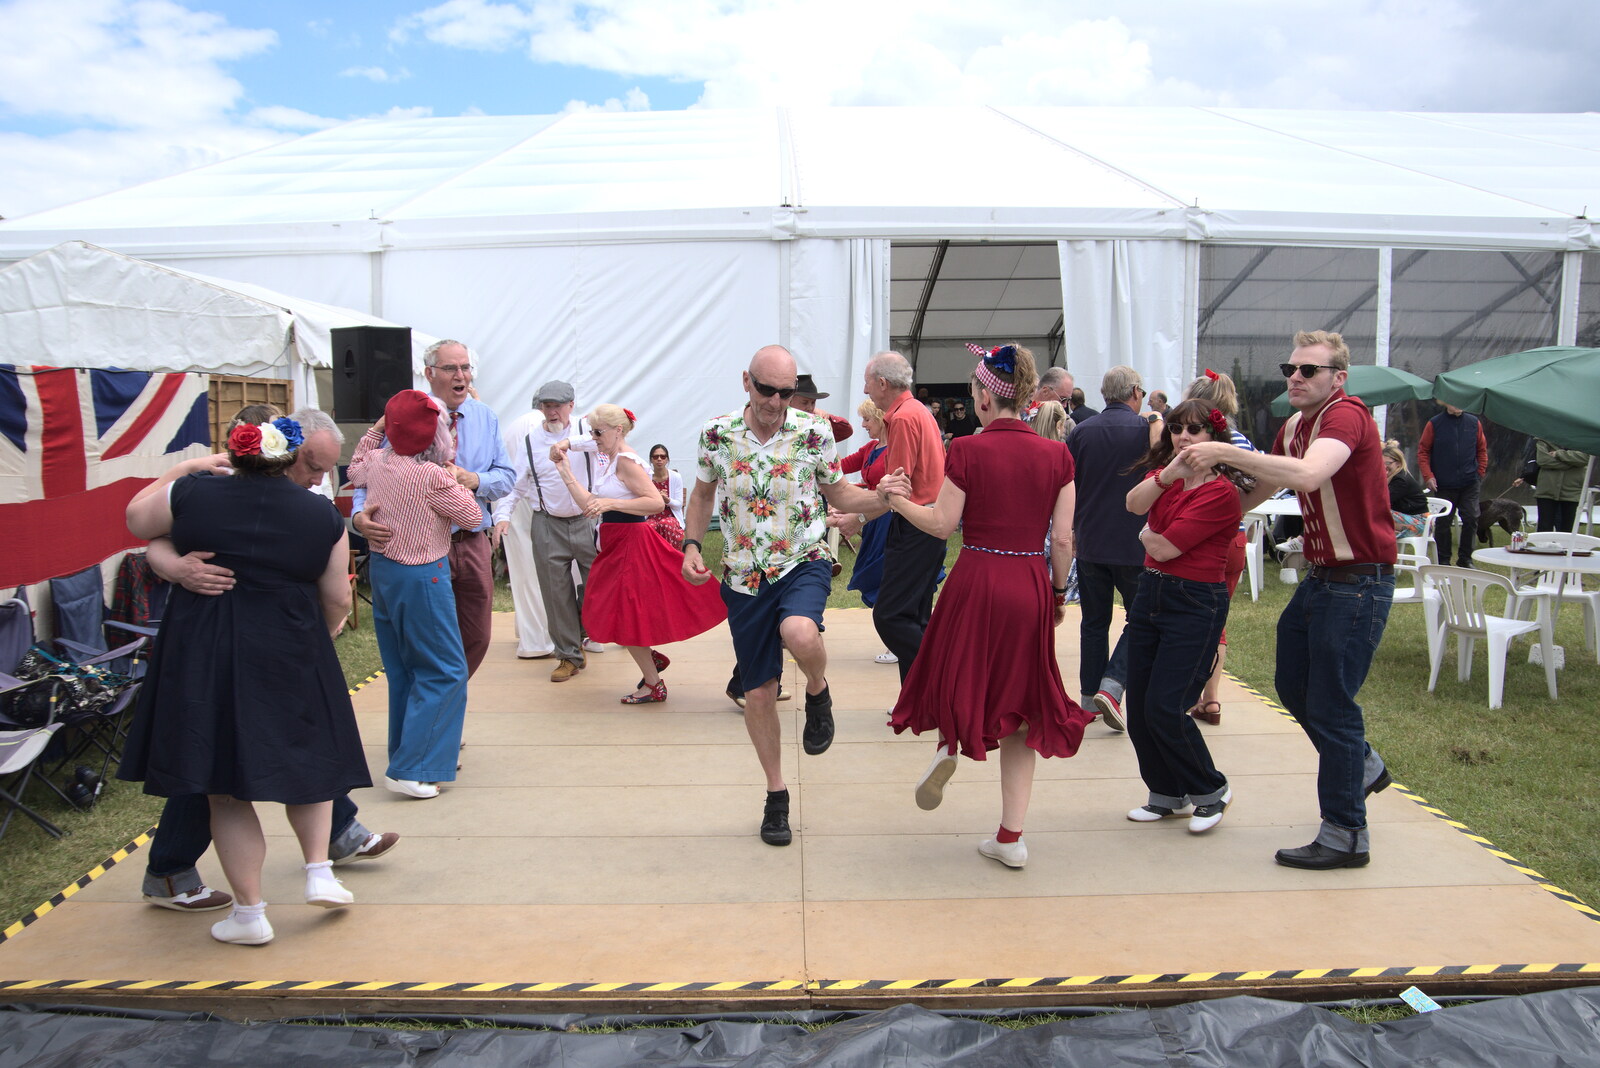 The Suffolk Show, Trinity Park, Ipswich - 1st June 2022: There's some jiving going on